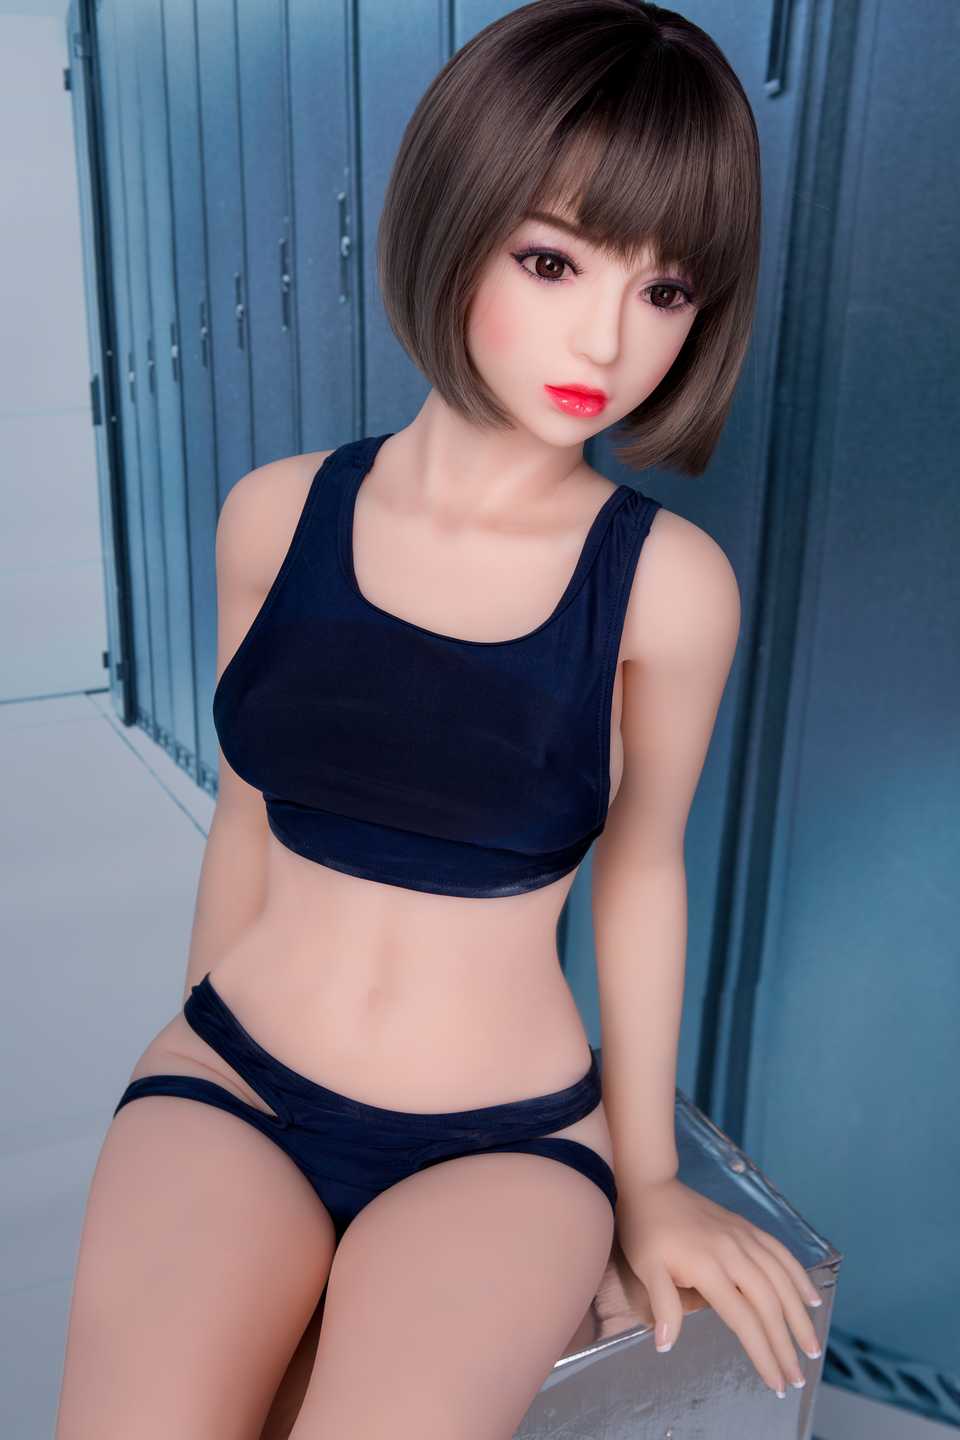 Teeny Sex Doll - Young Looking Sex Doll - Sexy Young Love Doll - Young Teen Sex Doll